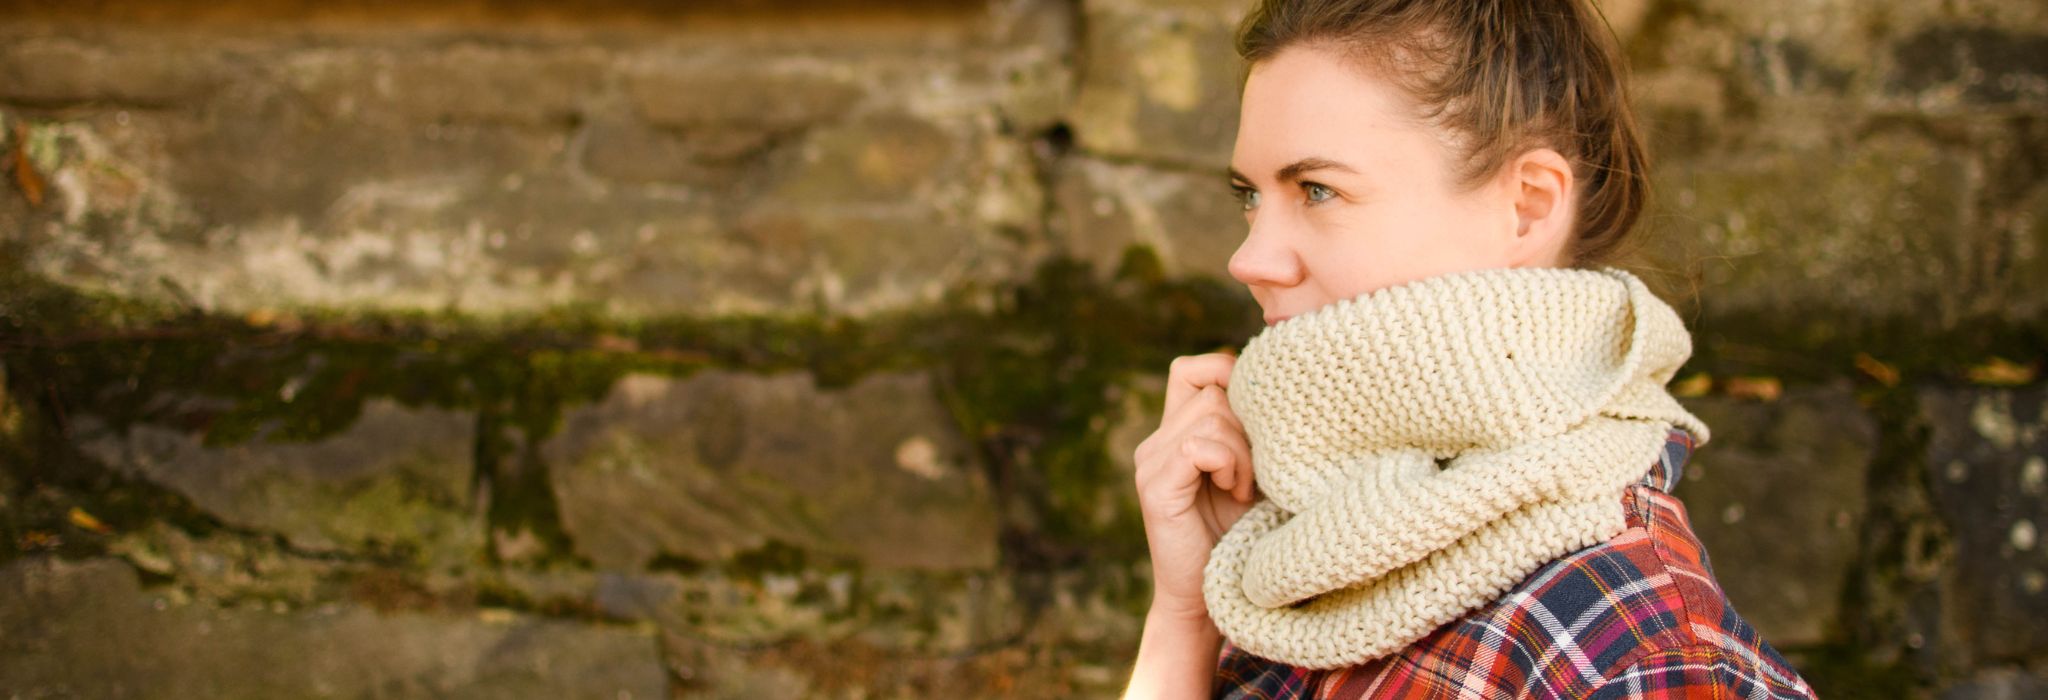 How to Knit a Scarf for Beginners - Free Knitting Pattern Step by